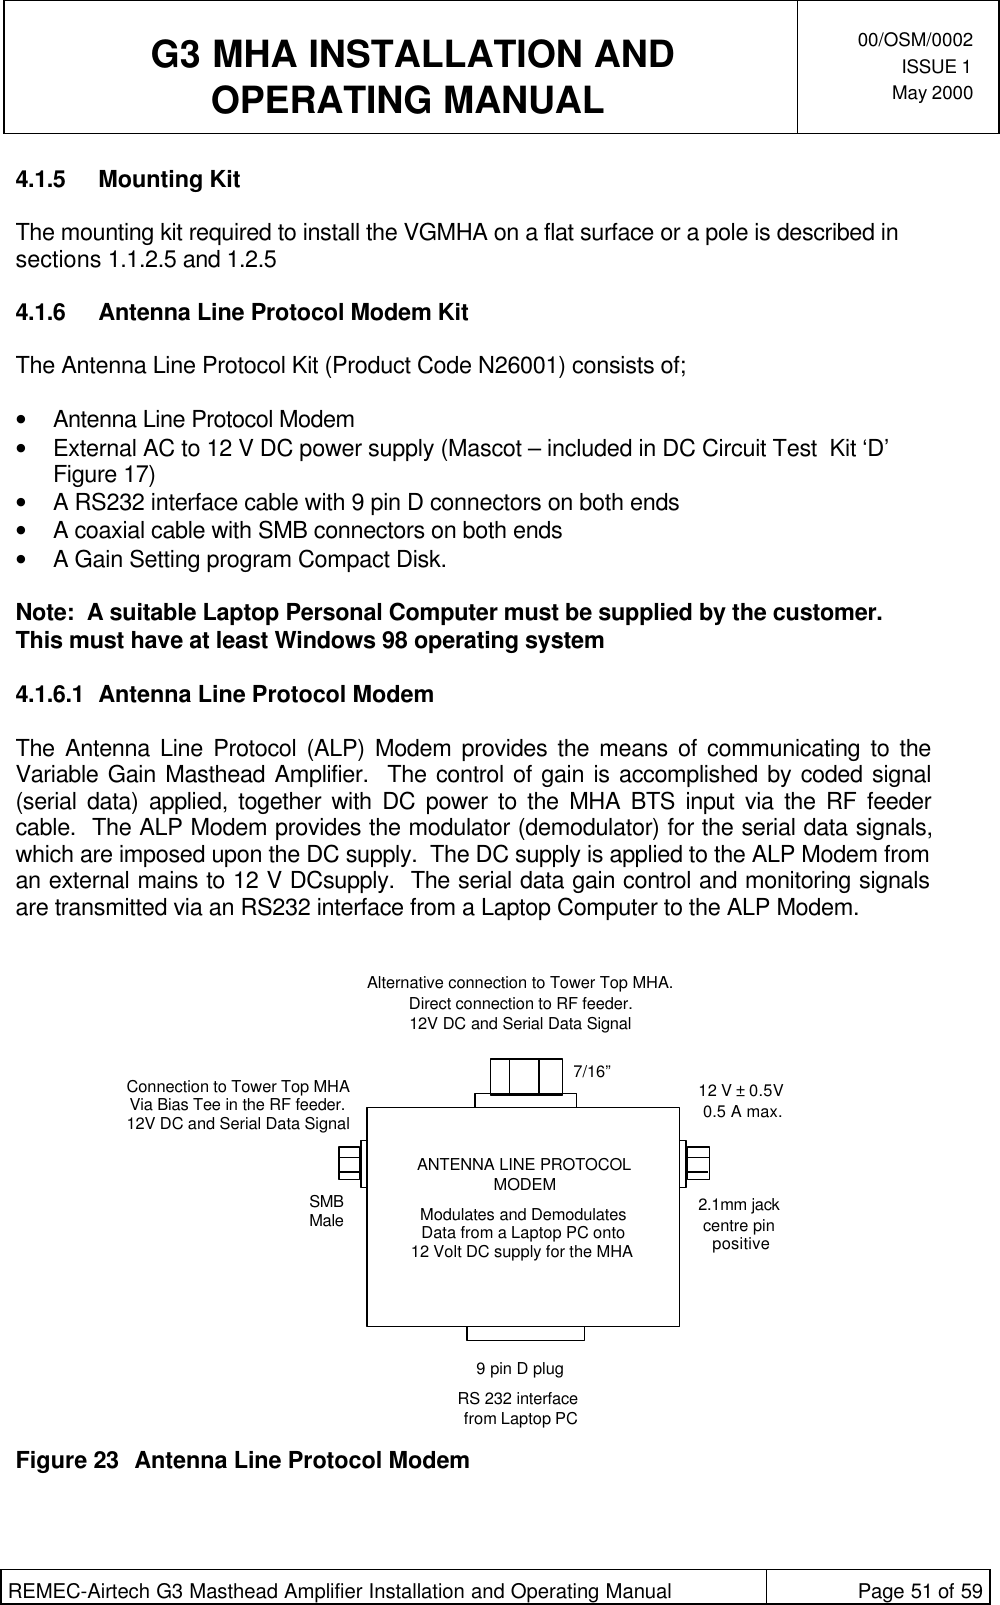  G3 MHA INSTALLATION ANDOPERATING MANUAL00/OSM/0002ISSUE 1May 2000REMEC-Airtech G3 Masthead Amplifier Installation and Operating Manual Page 51 of 594.1.5 Mounting KitThe mounting kit required to install the VGMHA on a flat surface or a pole is described insections 1.1.2.5 and 1.2.54.1.6 Antenna Line Protocol Modem KitThe Antenna Line Protocol Kit (Product Code N26001) consists of;• Antenna Line Protocol Modem• External AC to 12 V DC power supply (Mascot – included in DC Circuit Test  Kit ‘D’Figure 17)• A RS232 interface cable with 9 pin D connectors on both ends• A coaxial cable with SMB connectors on both ends• A Gain Setting program Compact Disk.Note:  A suitable Laptop Personal Computer must be supplied by the customer.This must have at least Windows 98 operating system4.1.6.1 Antenna Line Protocol ModemThe Antenna Line Protocol (ALP) Modem provides the means of communicating to theVariable Gain Masthead Amplifier.  The control of gain is accomplished by coded signal(serial data) applied, together with DC power to the MHA BTS input via the RF feedercable.  The ALP Modem provides the modulator (demodulator) for the serial data signals,which are imposed upon the DC supply.  The DC supply is applied to the ALP Modem froman external mains to 12 V DCsupply.  The serial data gain control and monitoring signalsare transmitted via an RS232 interface from a Laptop Computer to the ALP Modem.Figure 23 Antenna Line Protocol ModemANTENNA LINE PROTOCOLMODEMModulates and Demodulates Data from a Laptop PC onto 12 Volt DC supply for the MHA Alternative connection to Tower Top MHA. Direct connection to RF feeder.12V DC and Serial Data SignalConnection to Tower Top MHAVia Bias Tee in the RF feeder.12V DC and Serial Data Signal7/16”SMBMale 2.1mm jackcentre pinpositive12 V ± 0.5V0.5 A max.9 pin D plugRS 232 interface from Laptop PC